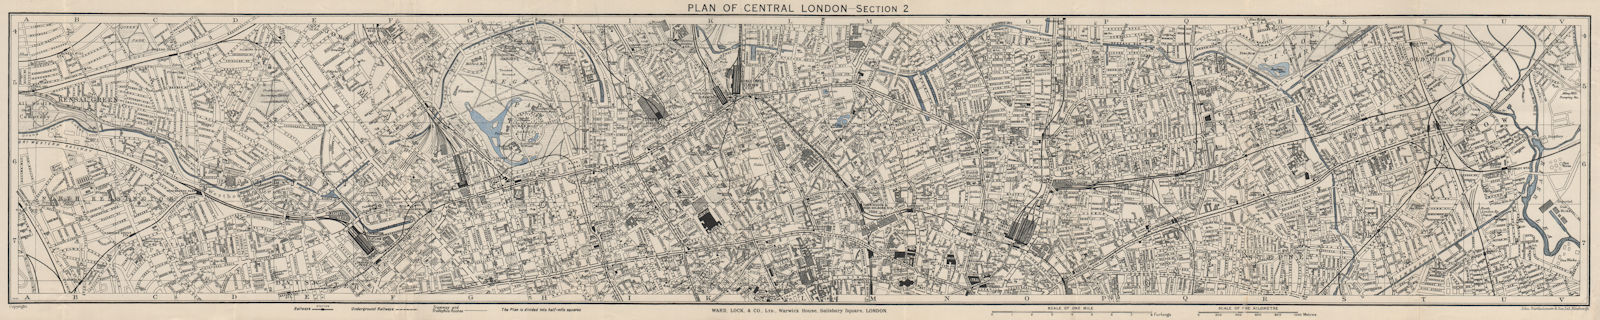 Associate Product CENTRAL LONDON-SECTION 2 vintage town/city plan. London. WARD LOCK 1937 map